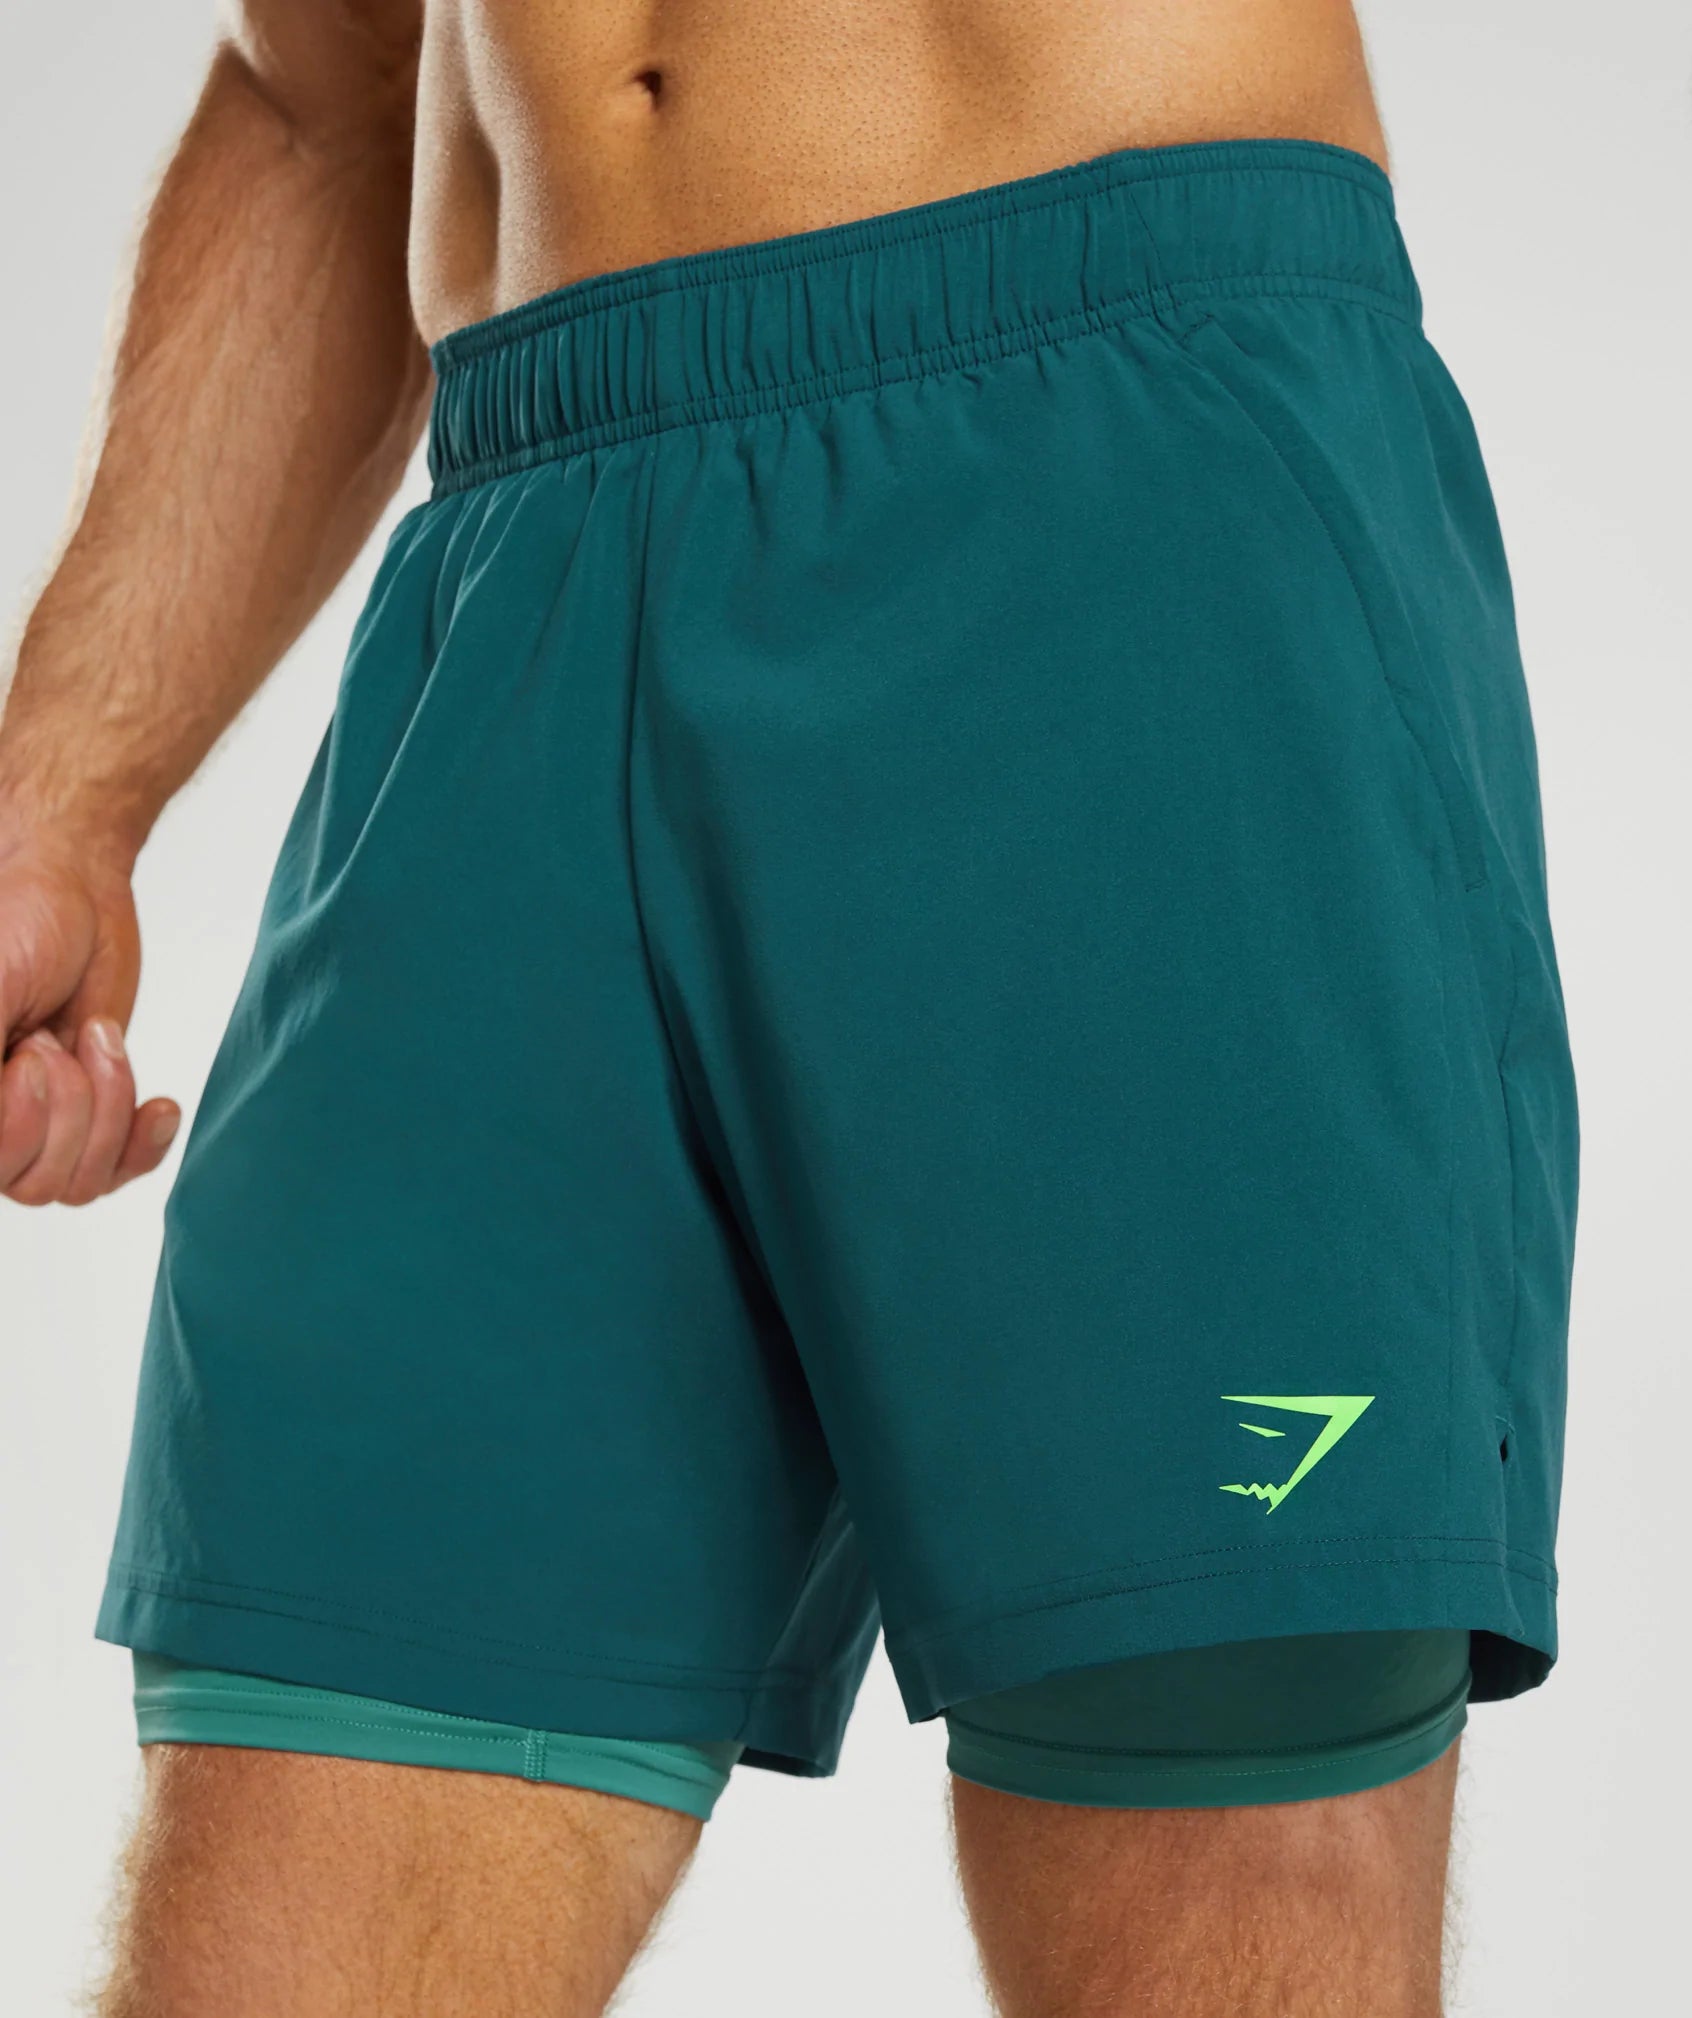 Sport 7" 2 In 1 Shorts in Winter Teal/Slate Blue - view 5